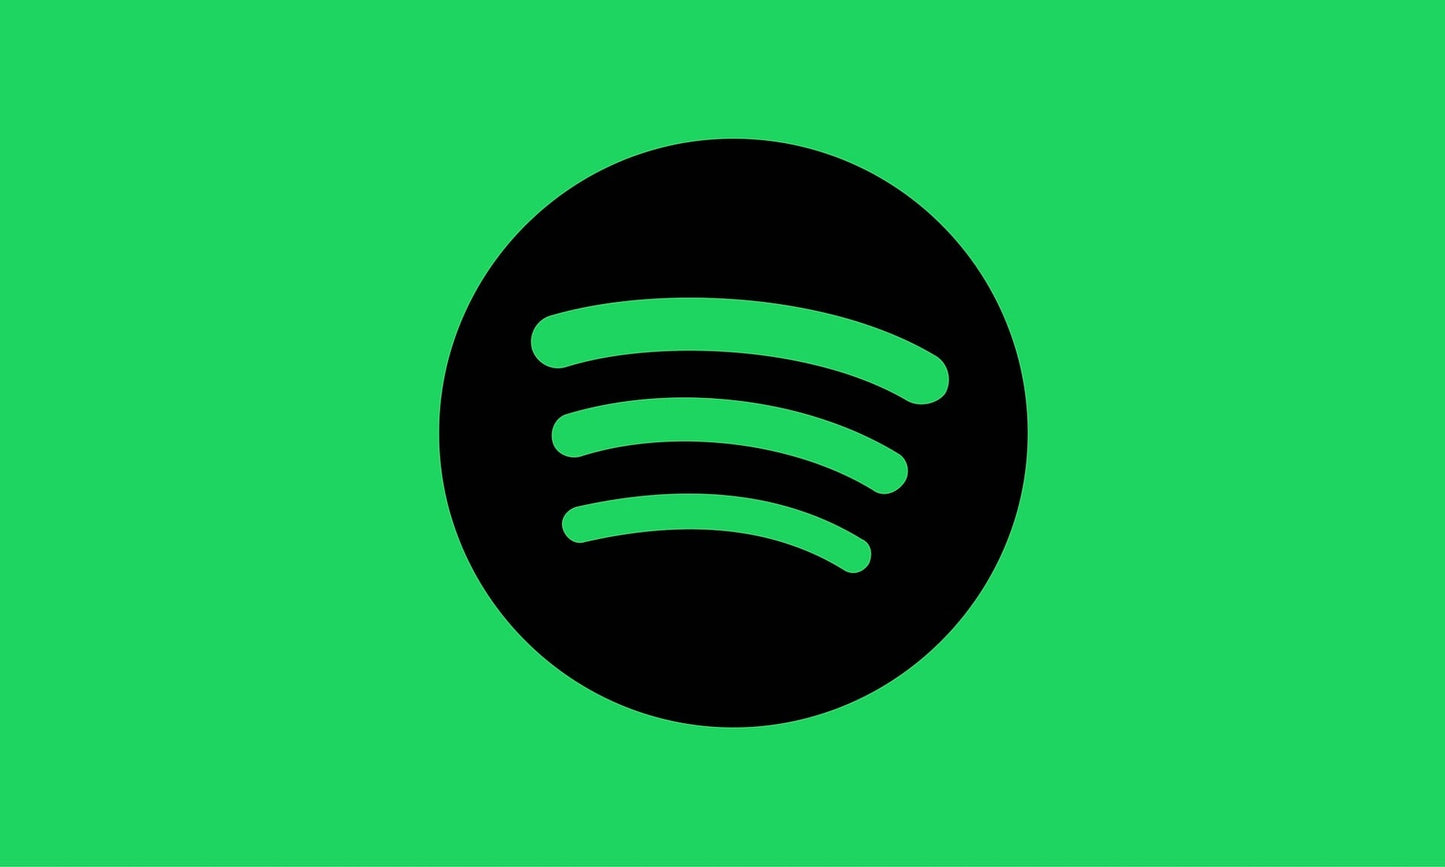 Echte Spotify Song Streaming